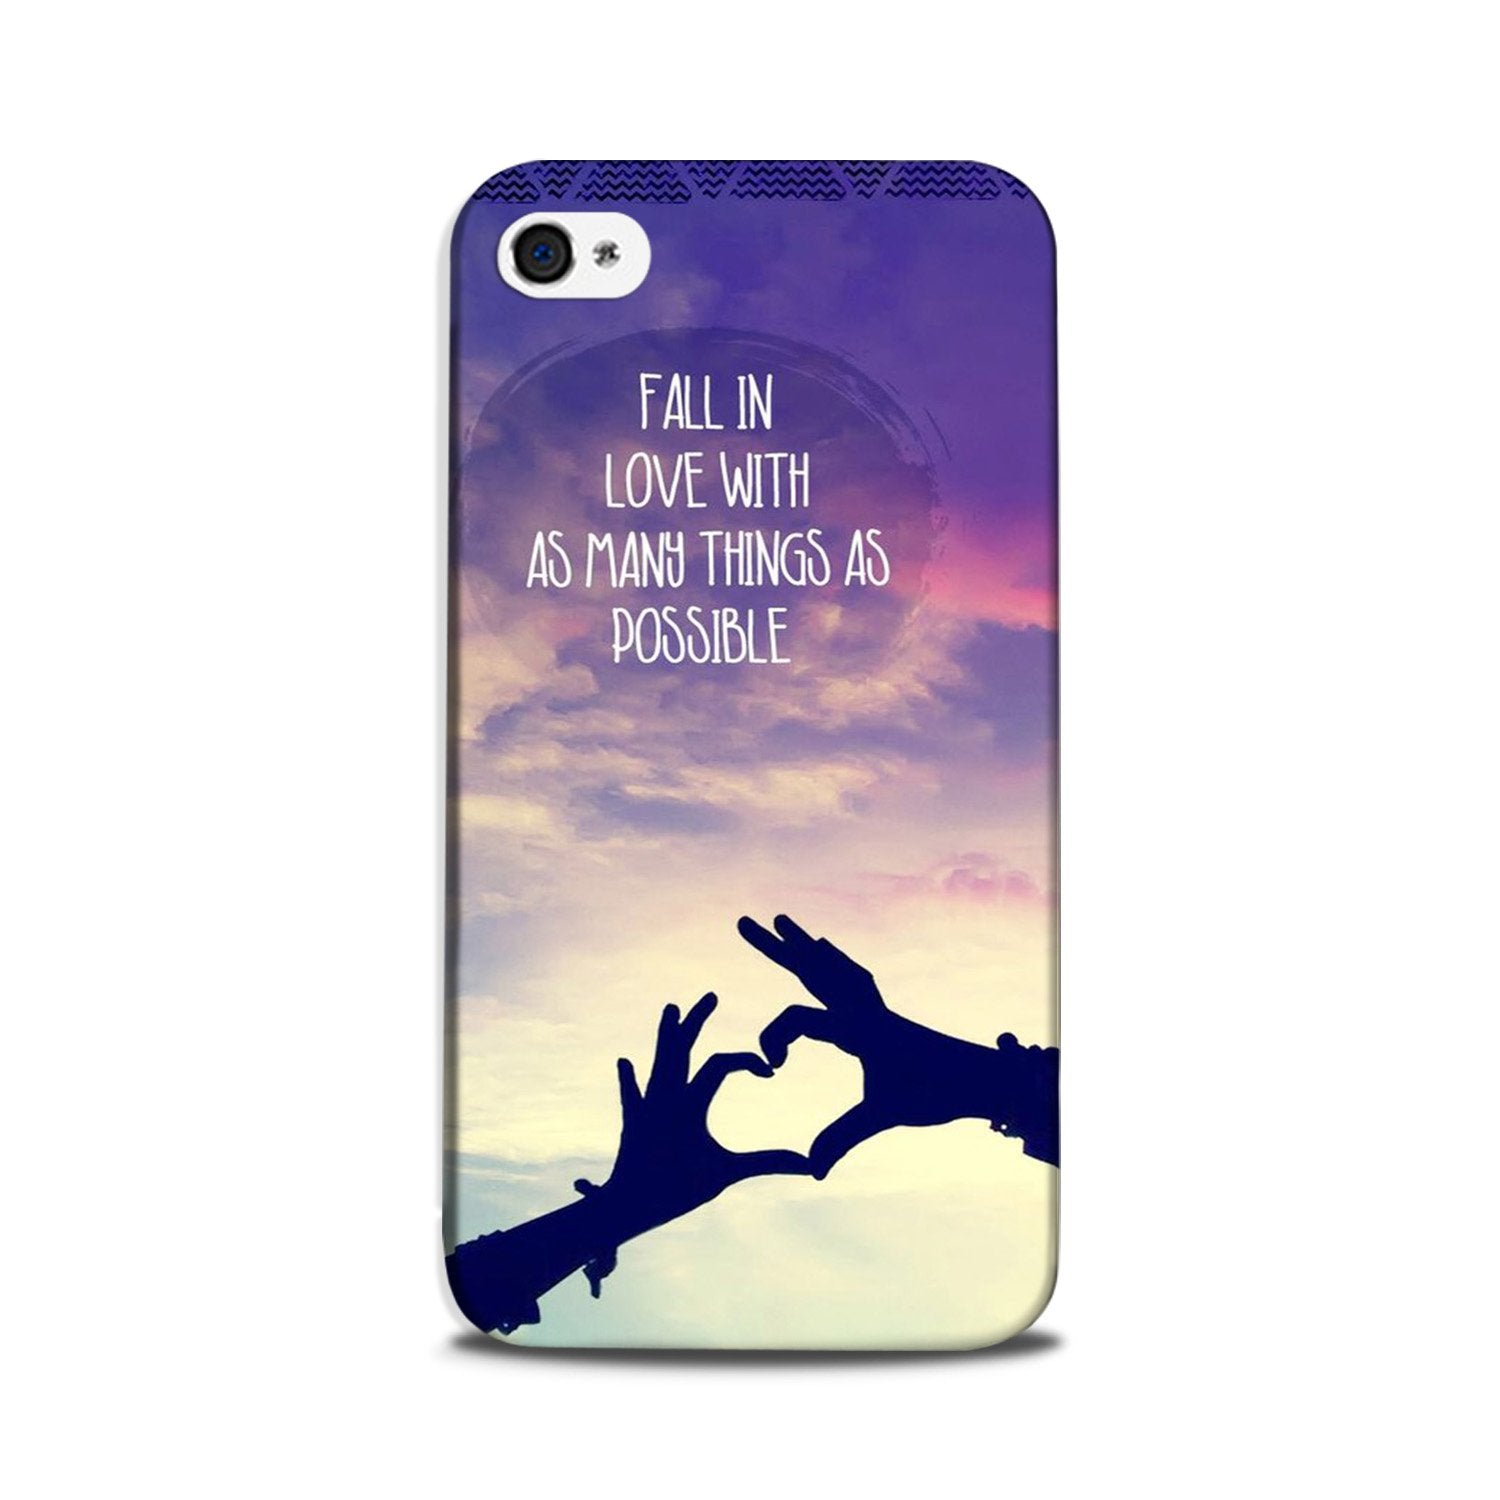 Fall in love Case for iPhone 5/ 5s